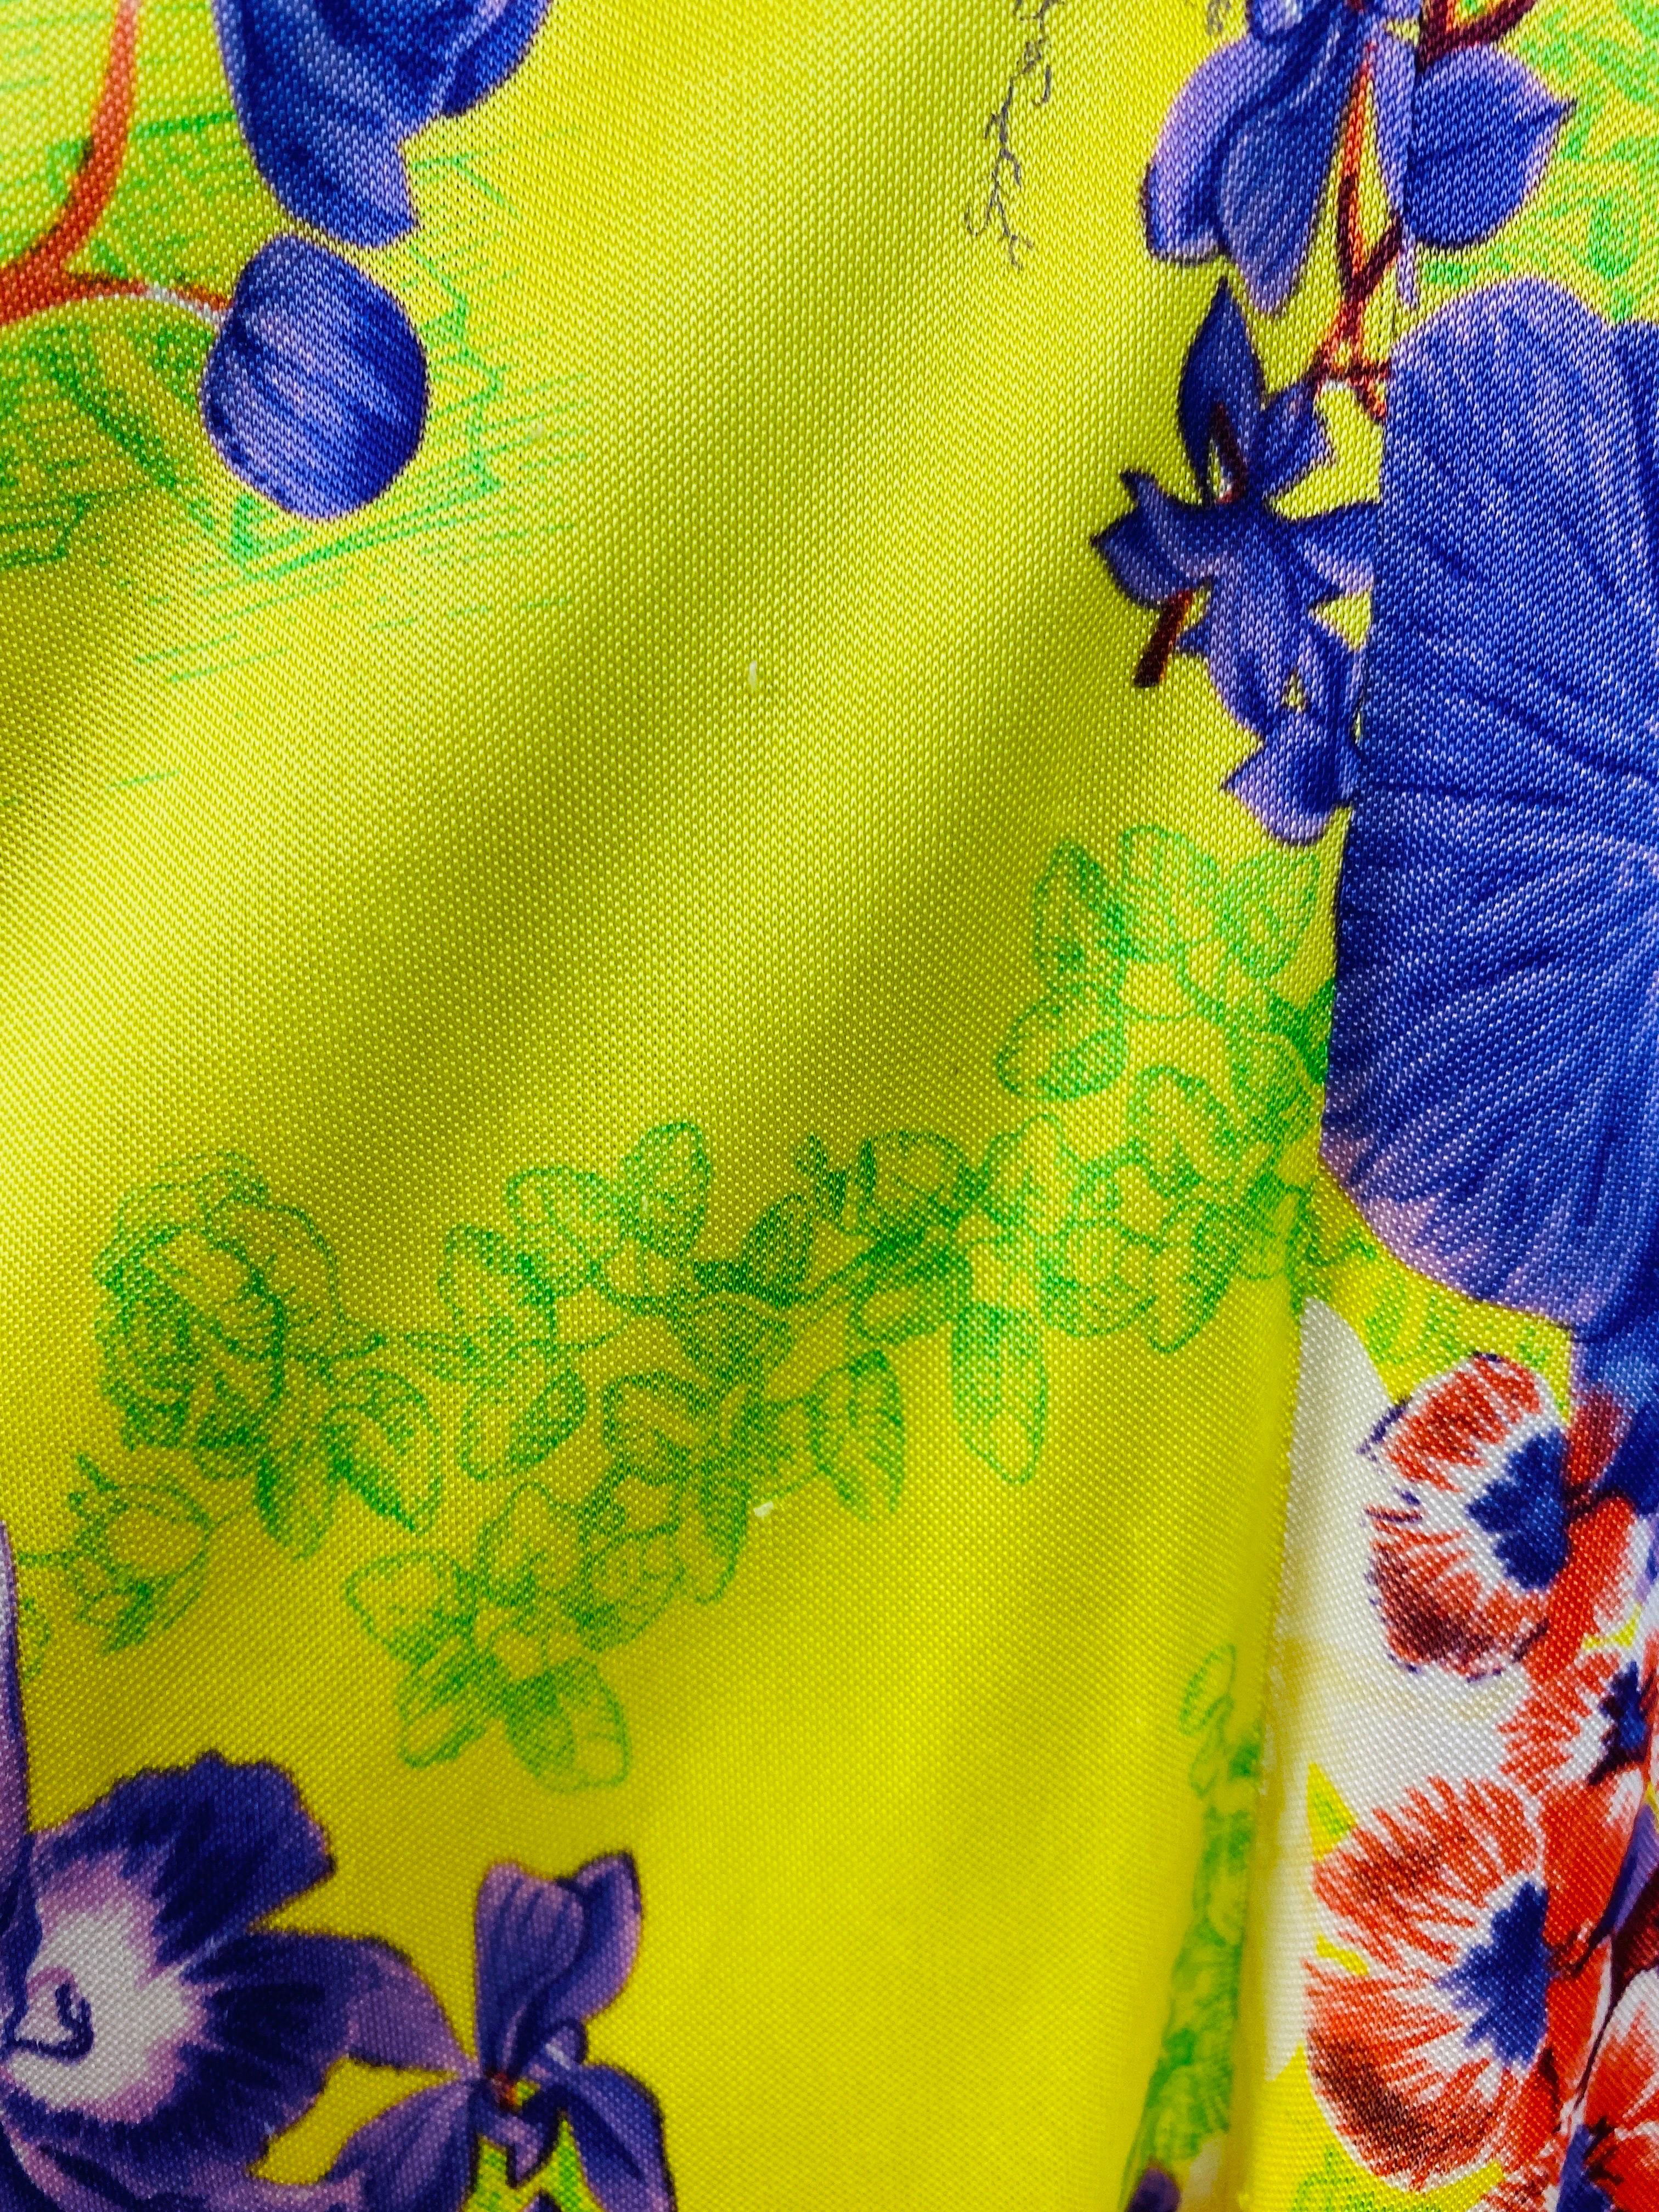 Vintage S/S 2004 Versace Dress Bright Yellow + Purple Orchid Floral Runway For Sale 13